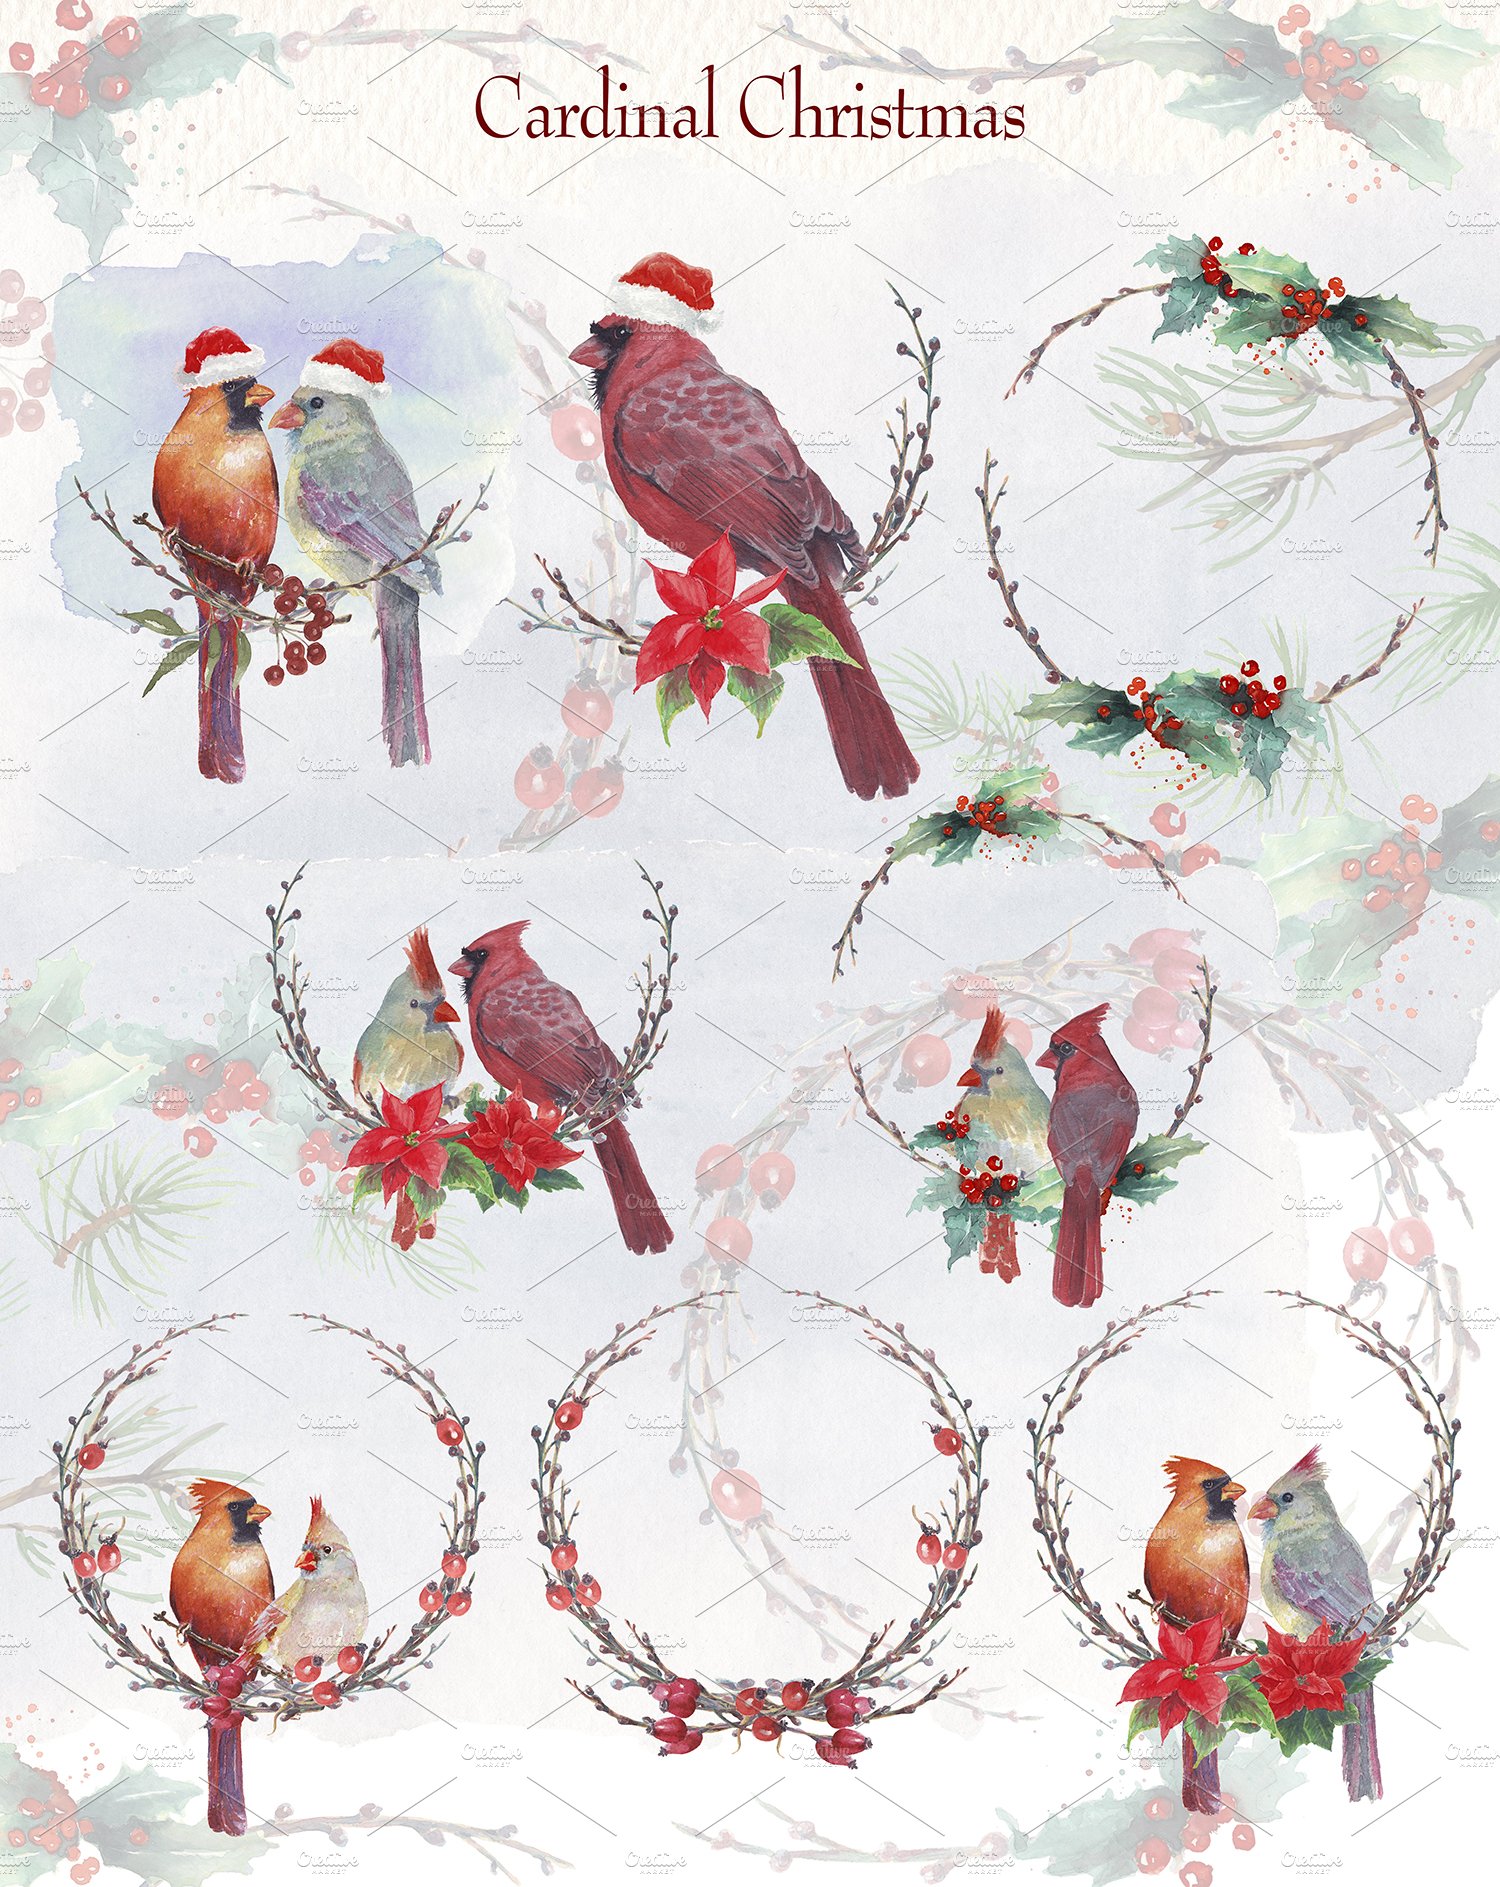 Christmas birds are ready for celebrating.